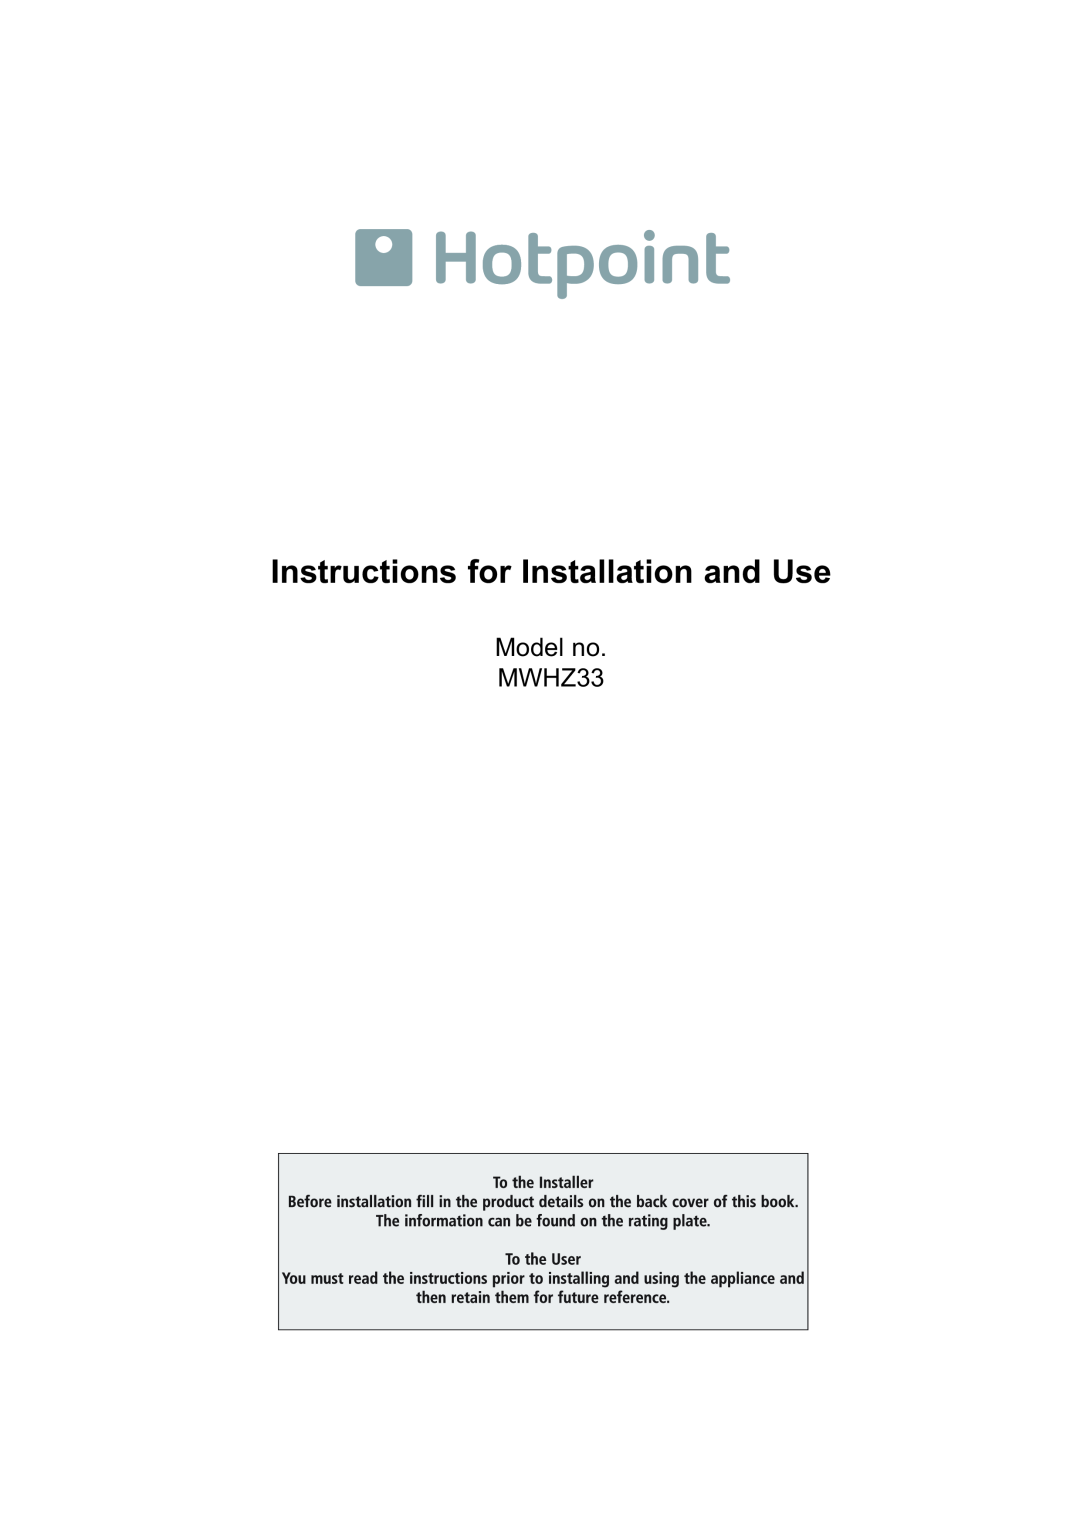 Hotpoint manual Instructions for Installation and Use, Model no. MWHZ33 